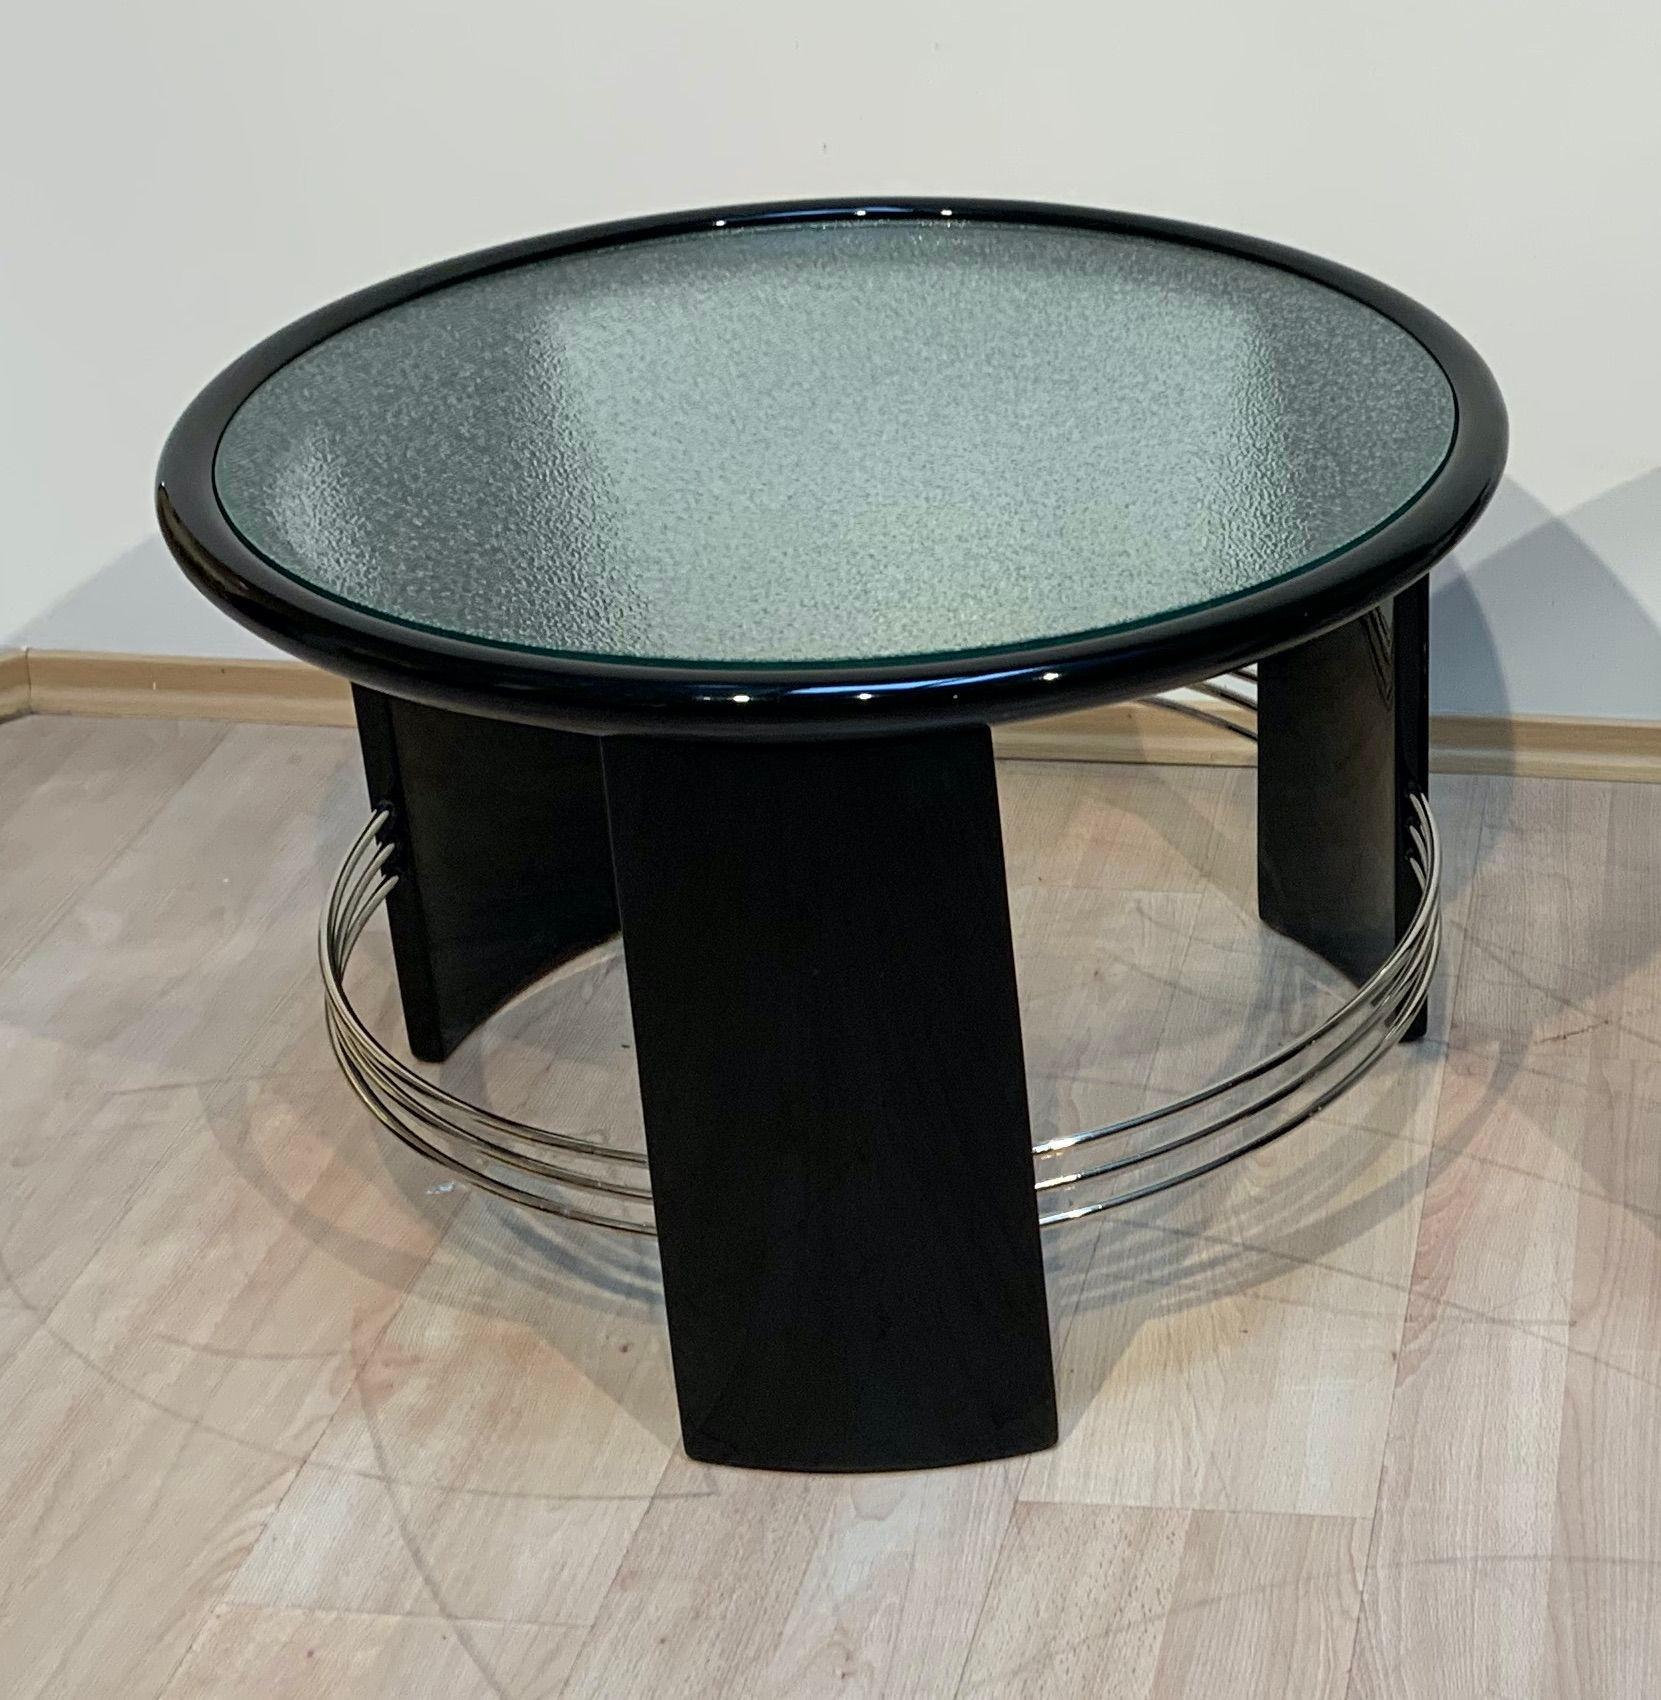 Polished Art Deco Round Coffee Table, Black Lacquer, Chrome, Glass, France circa 1930 For Sale